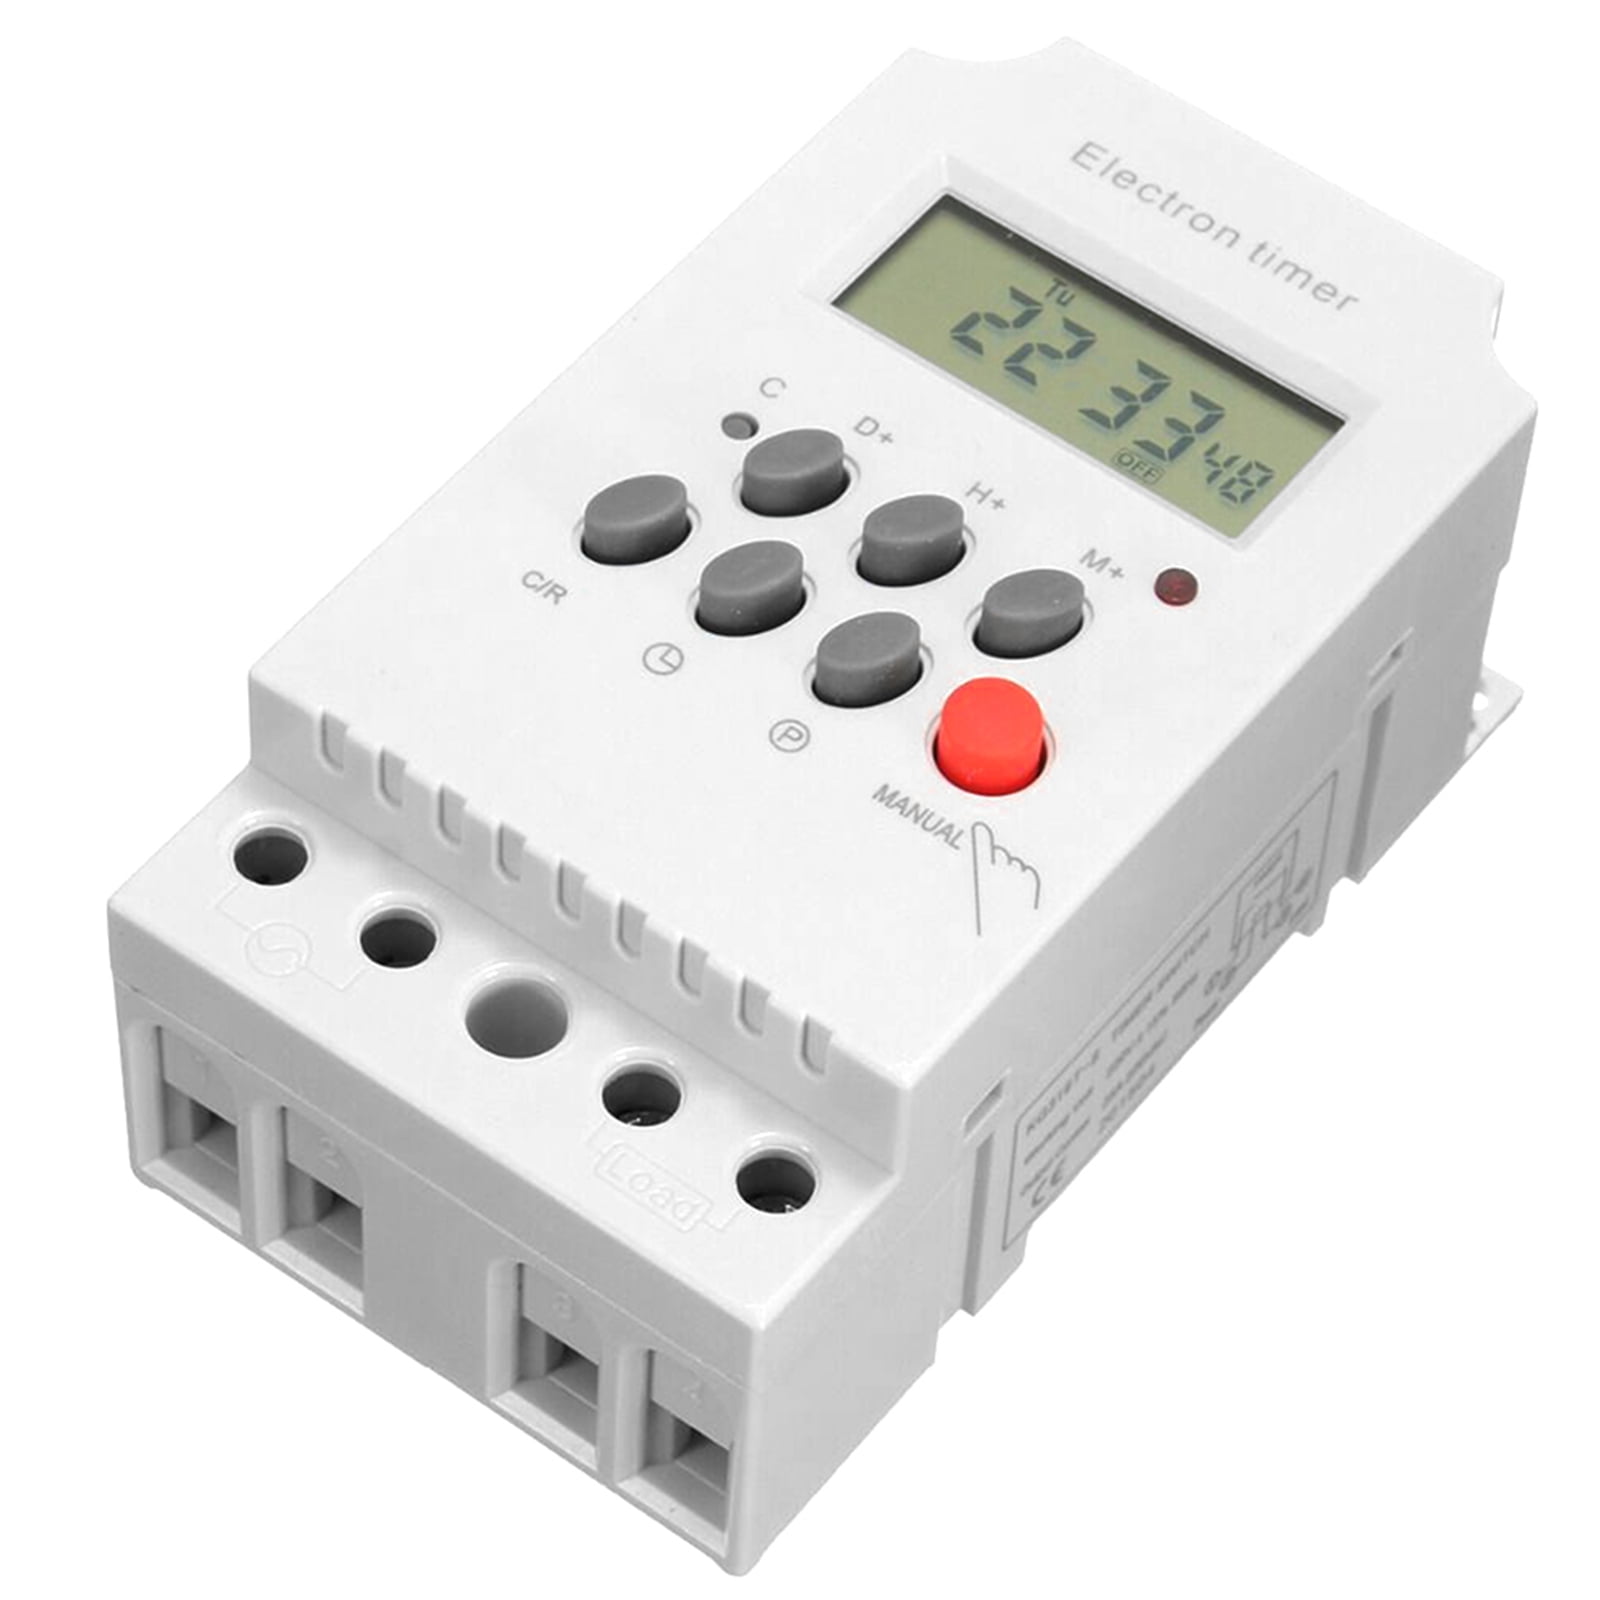 Practical LCD Digital Weekly Programmable Power Timer Time Relay Switch US 